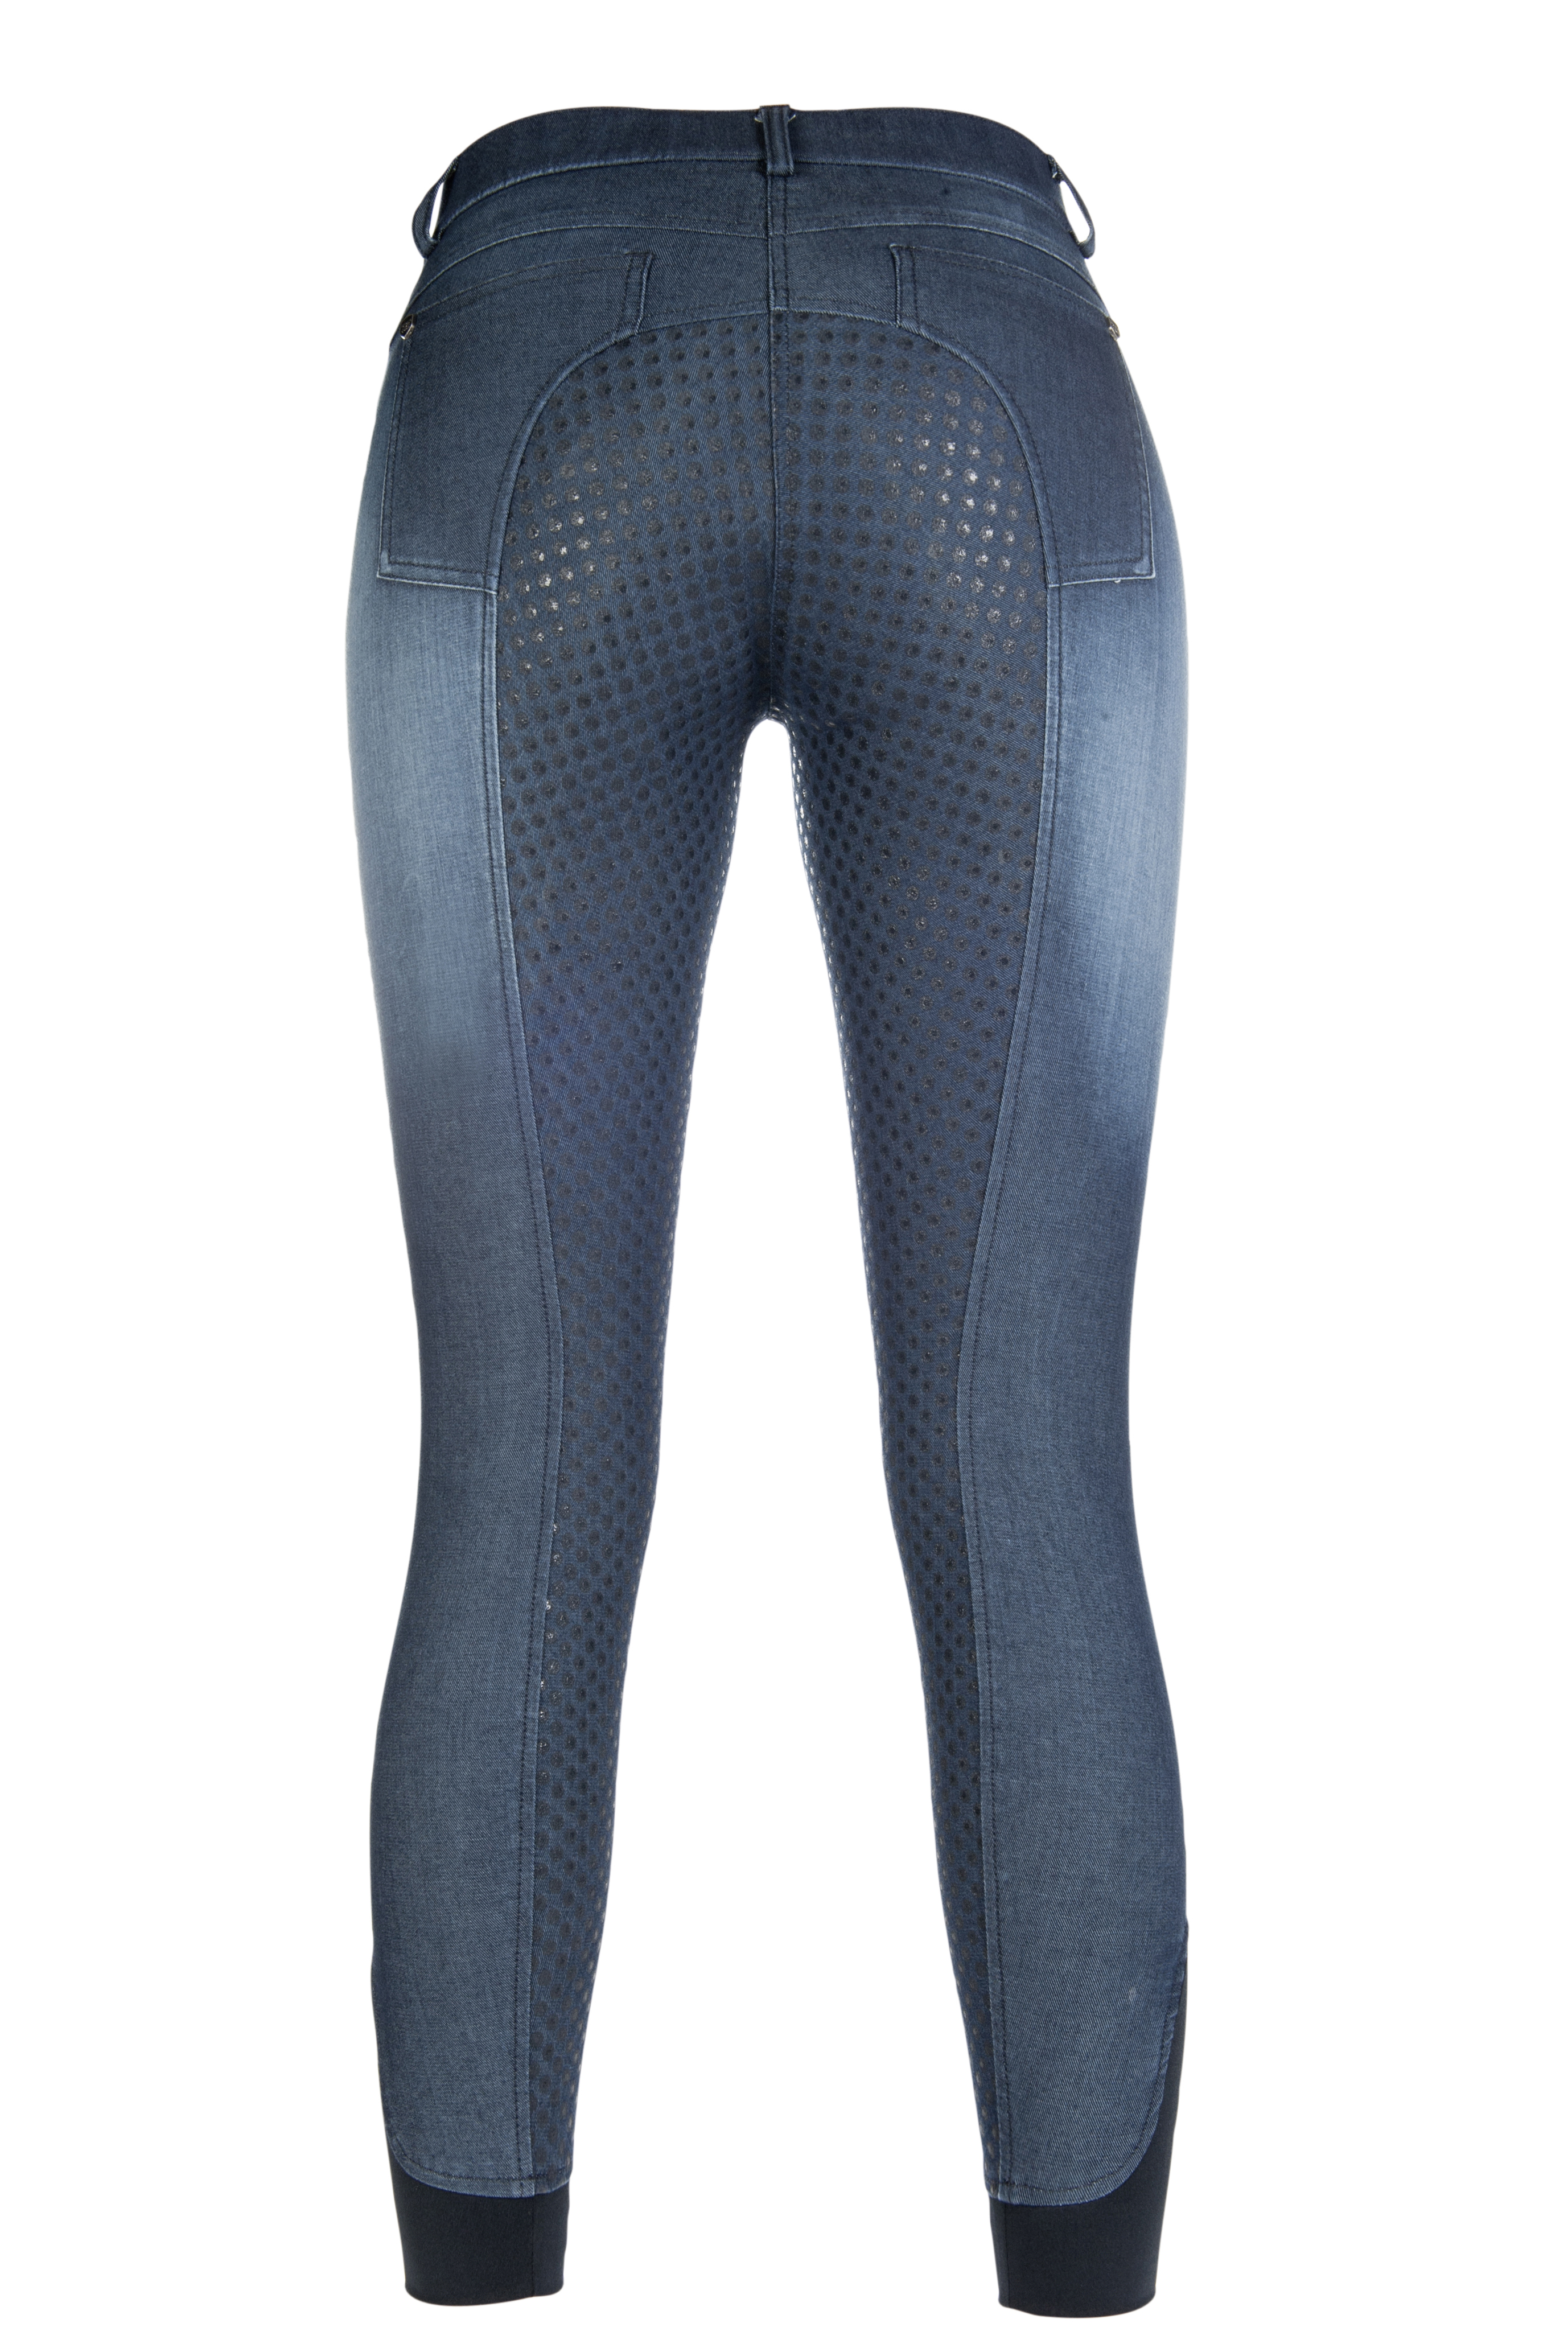 Hy PERFORMANCE Belgravia Ladies Breeches Silicone Knees Glitter Detailing 24-34 